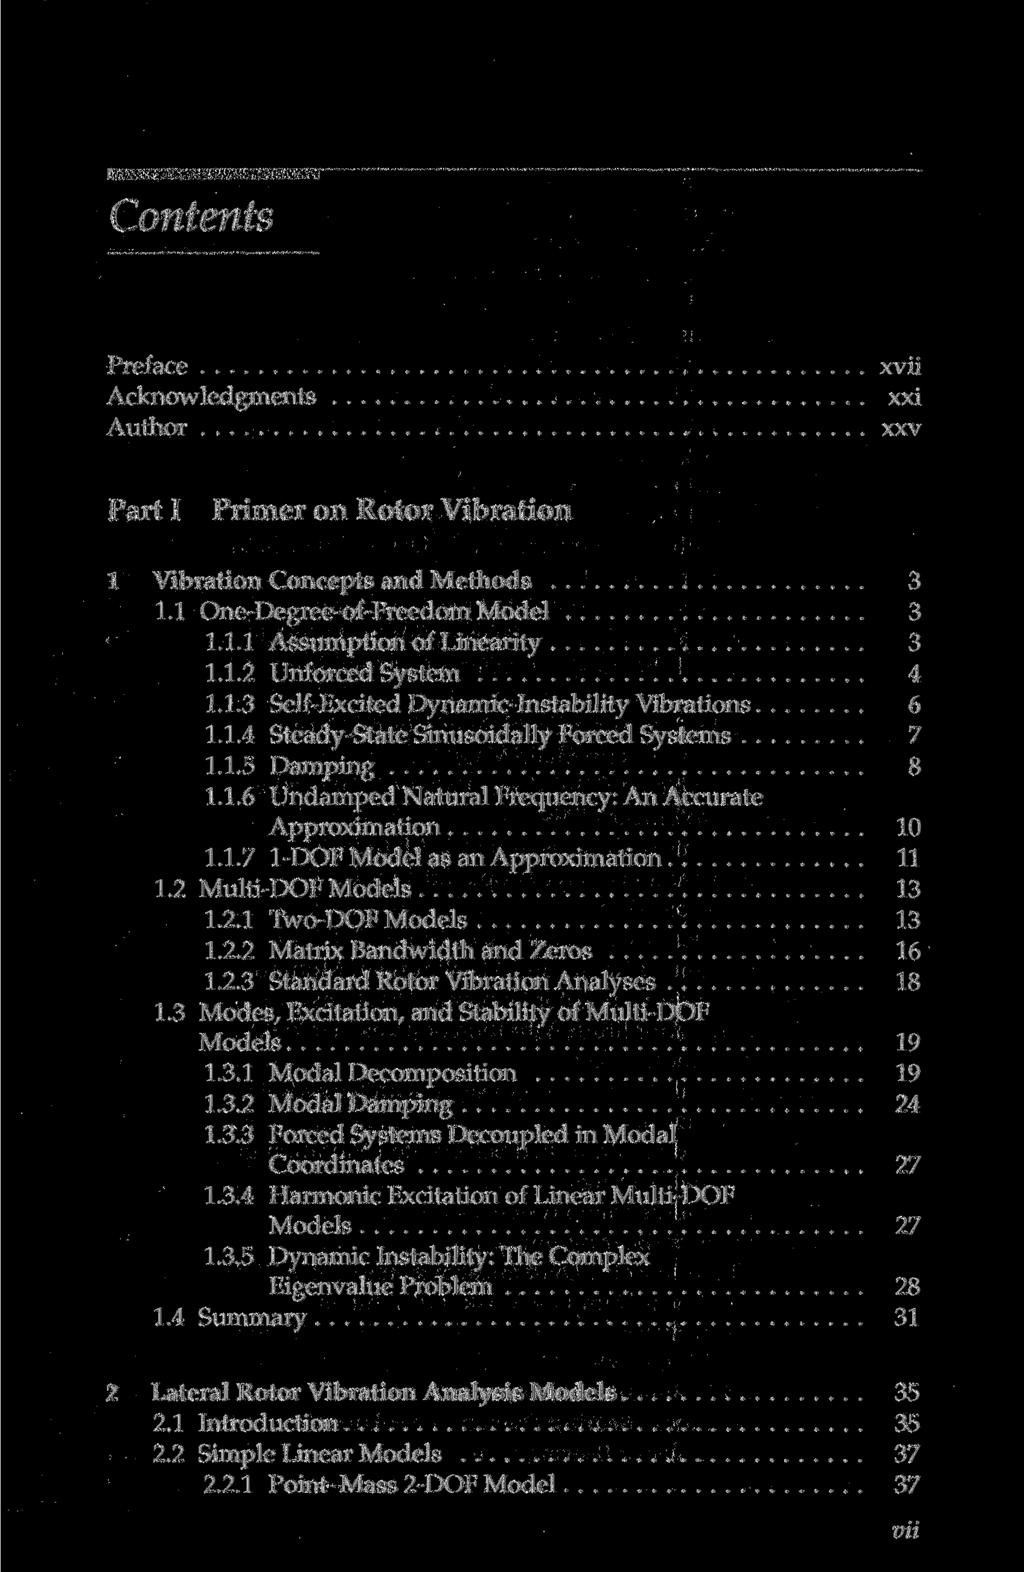 Contents Preface Acknowledgments Author xvii xxi xxv Part I Primer on Rotor Vibration 1 Vibration Concepts and Methods 3 1.1 One-Degree-of-Freedom Model 3 1.1.1 Assumption of Linearity 3 1.1.2 Unforced System 4 1.